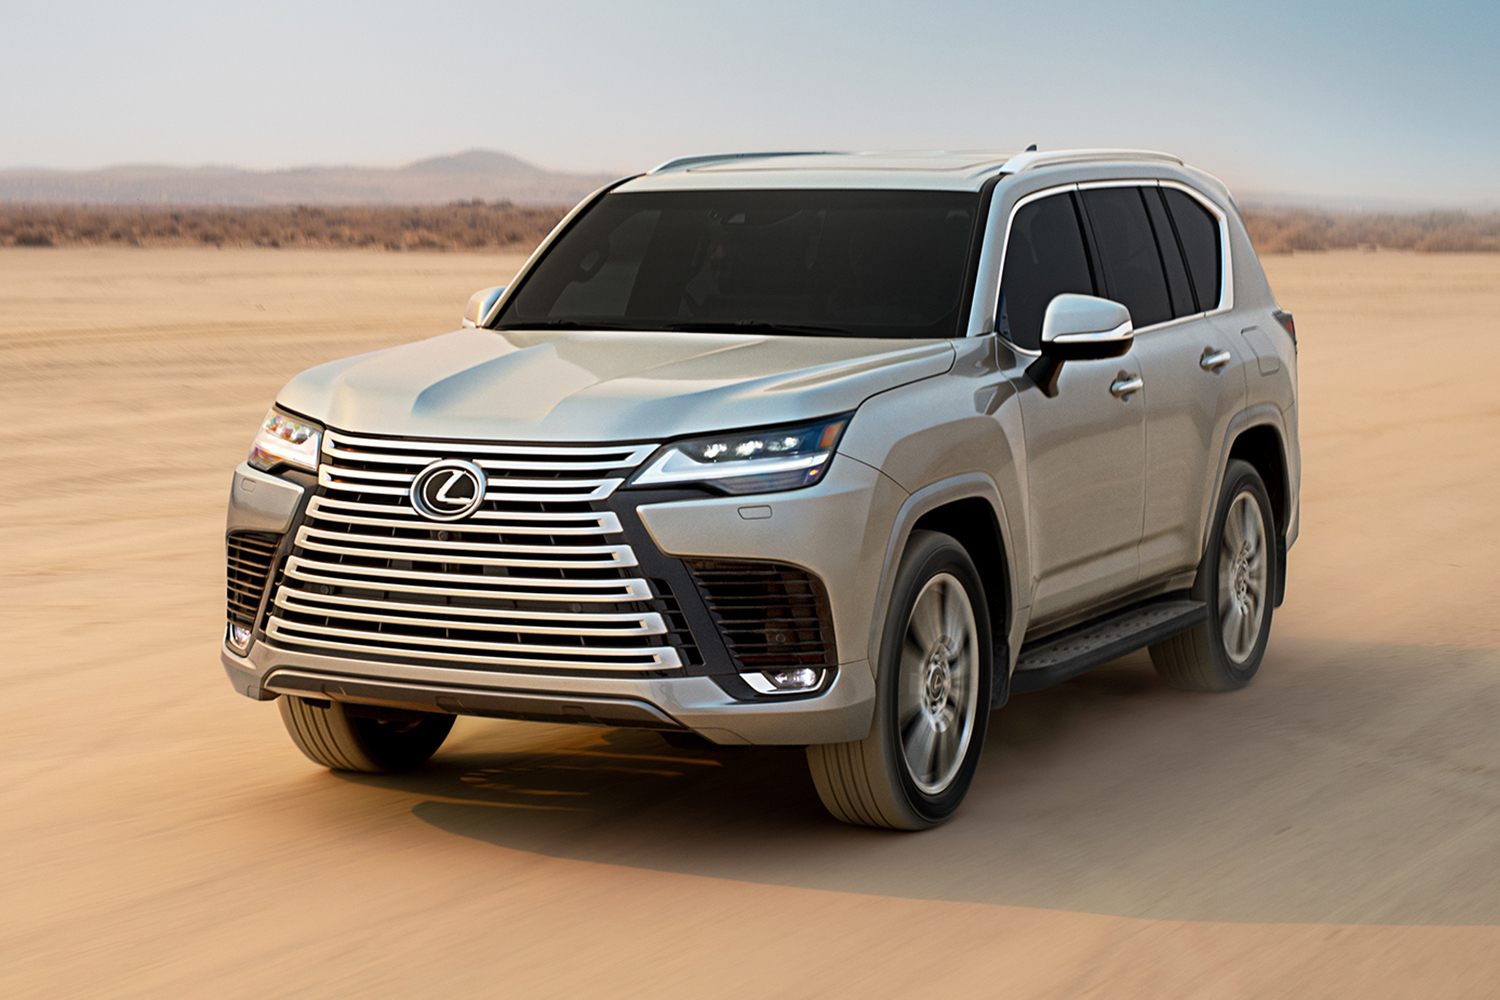 The 2022 Lexus LX 600 SUV with a large front grille driving through the desert on sand during the day